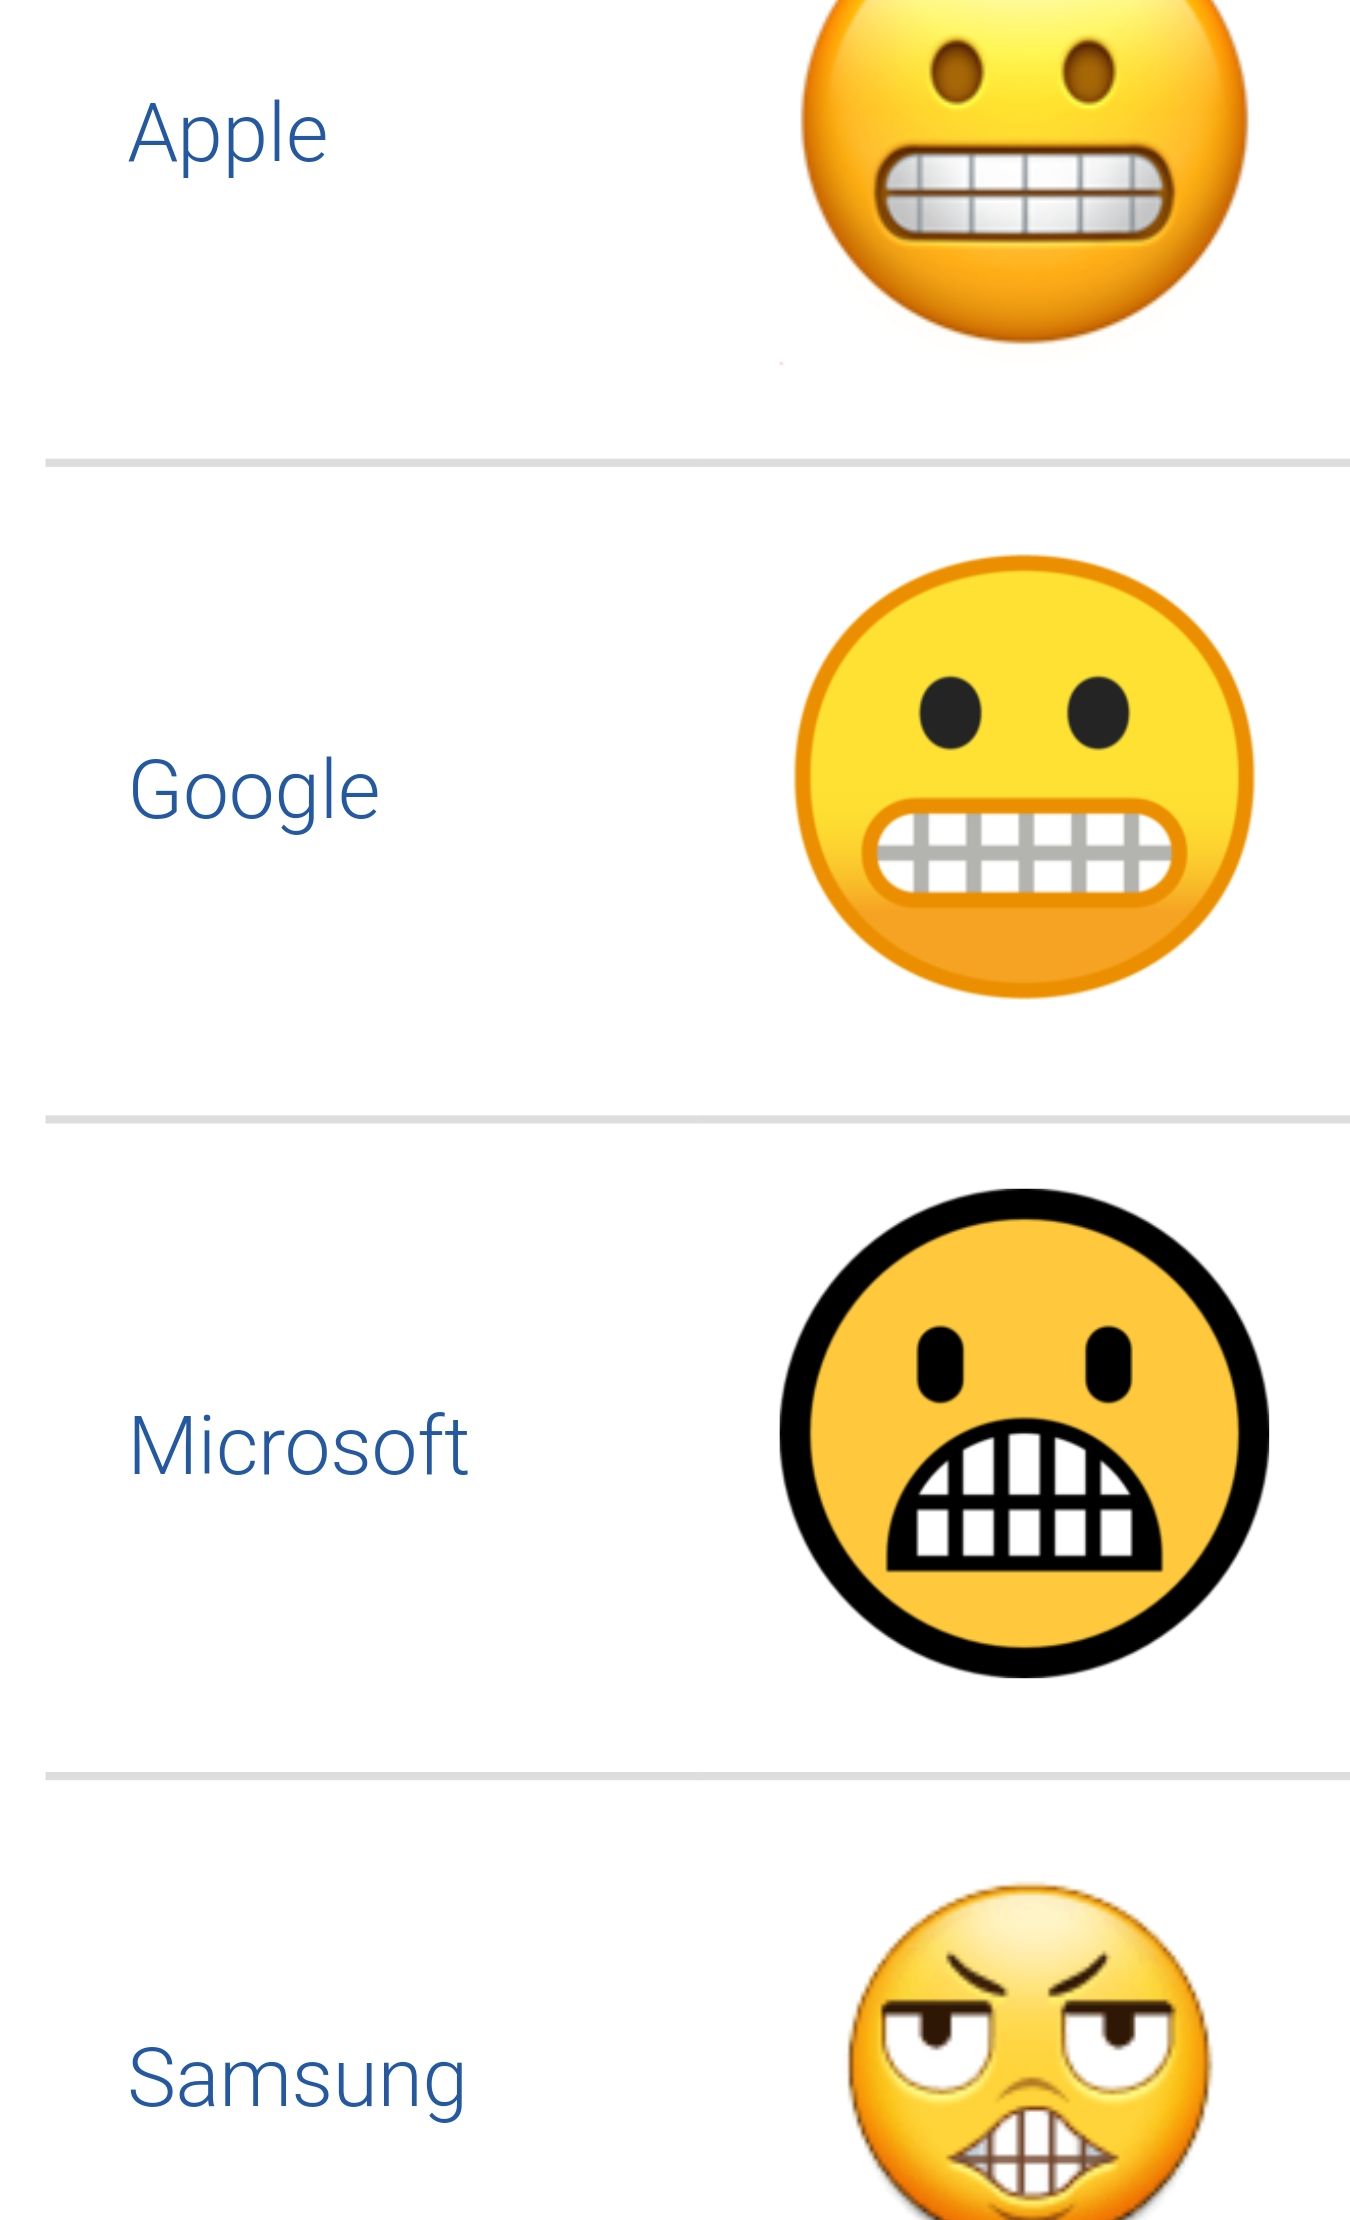 Samsung's emoji set is often different than other companies', causing